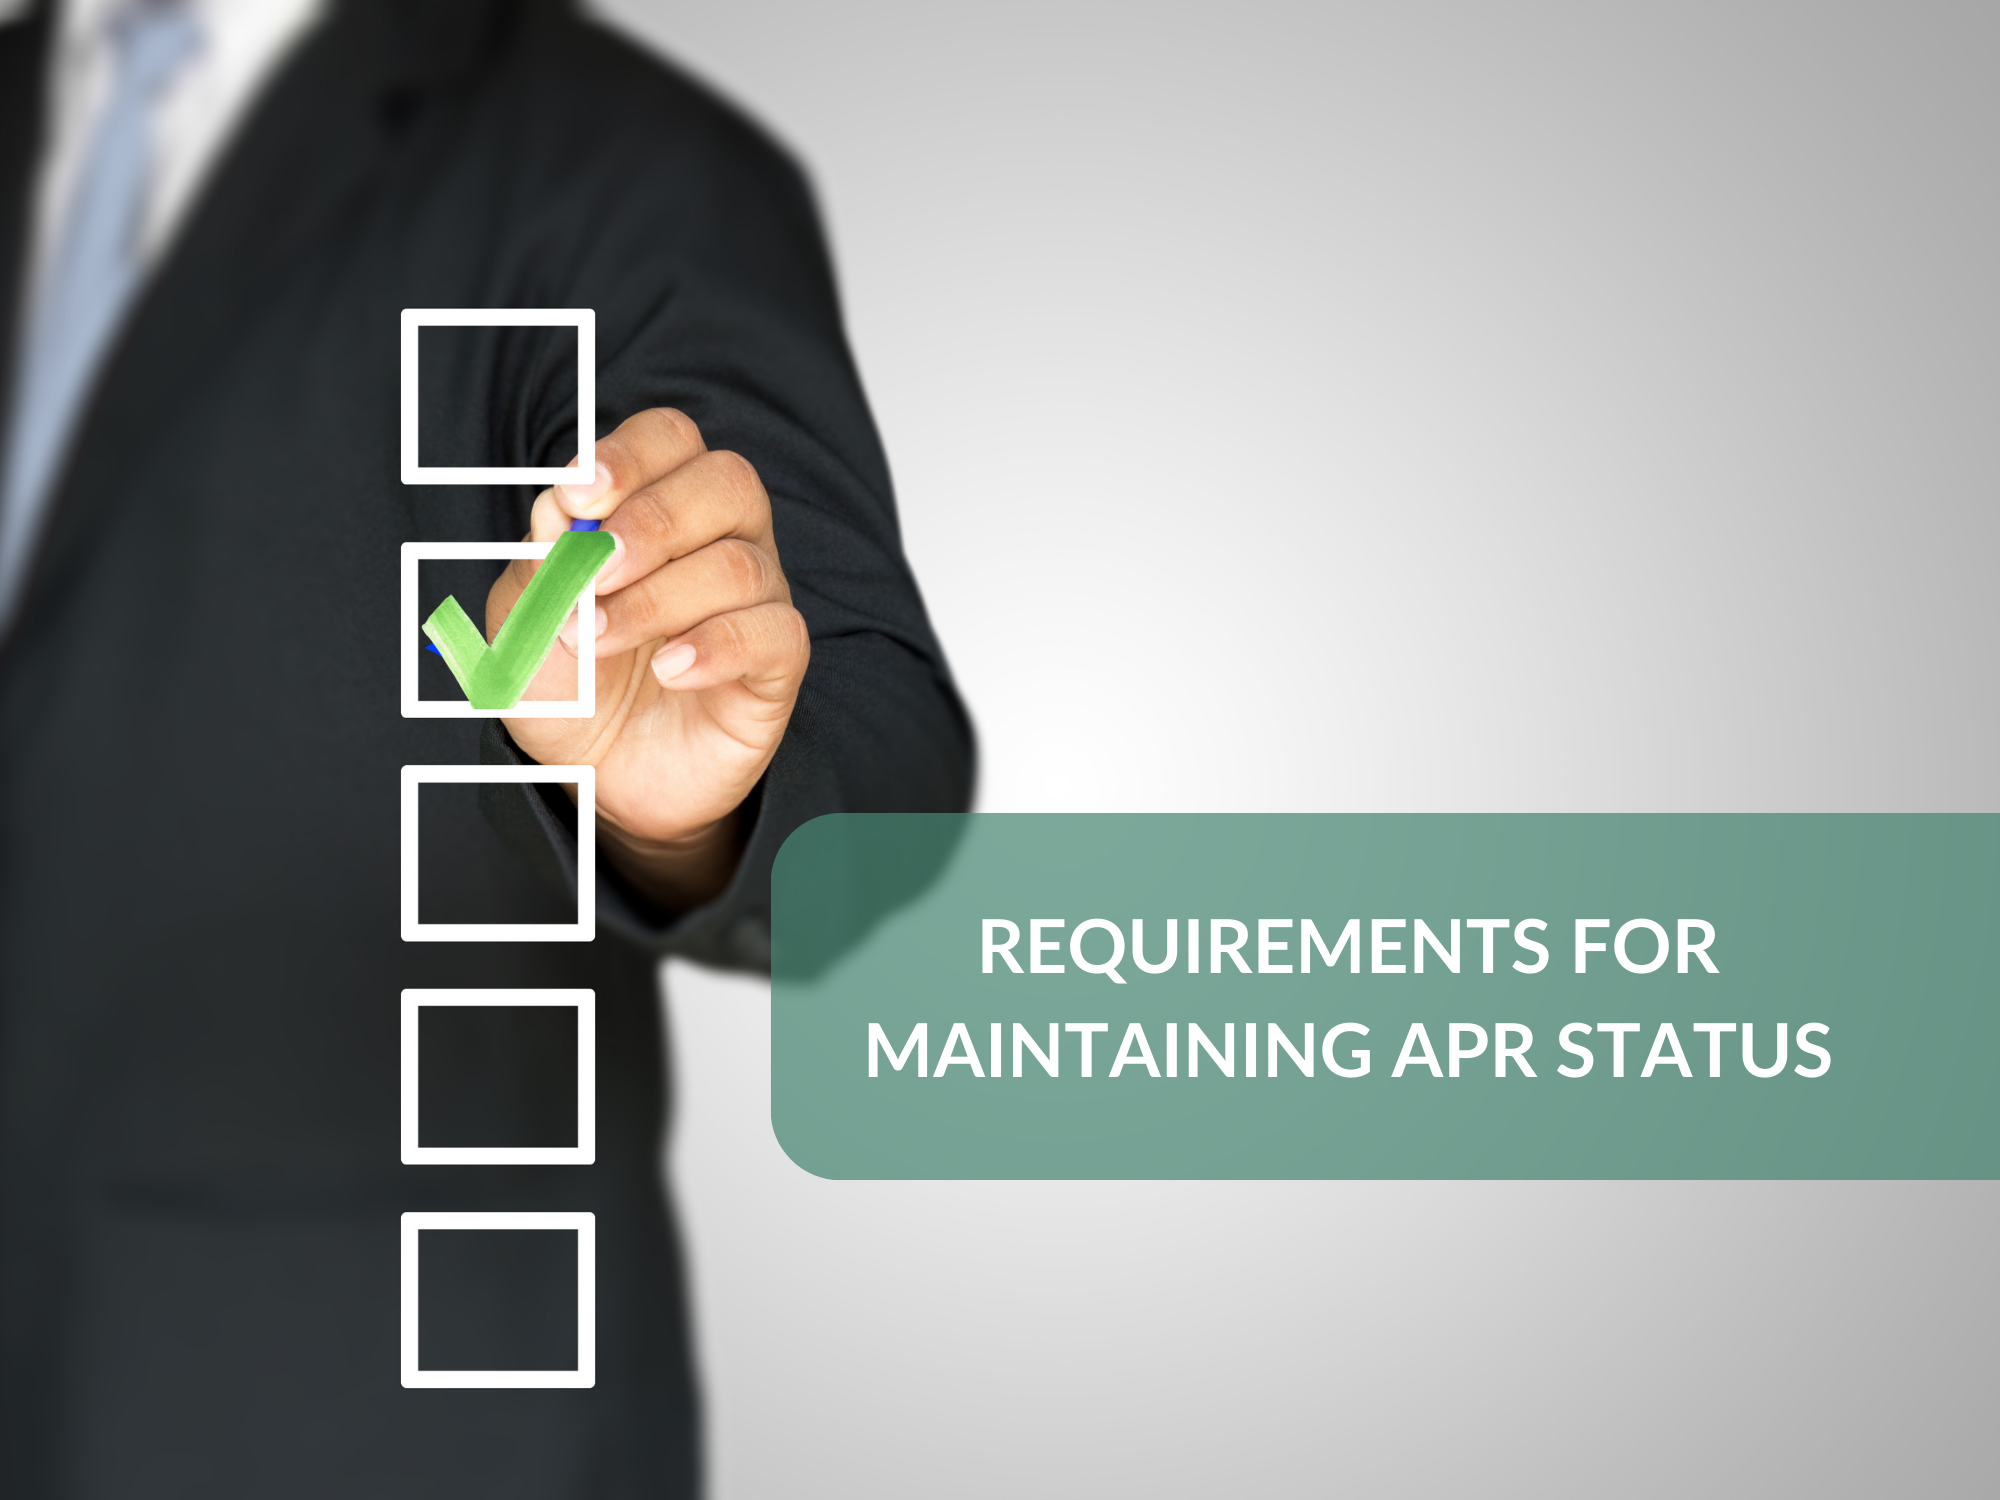 Requirements for maintaining ARP status